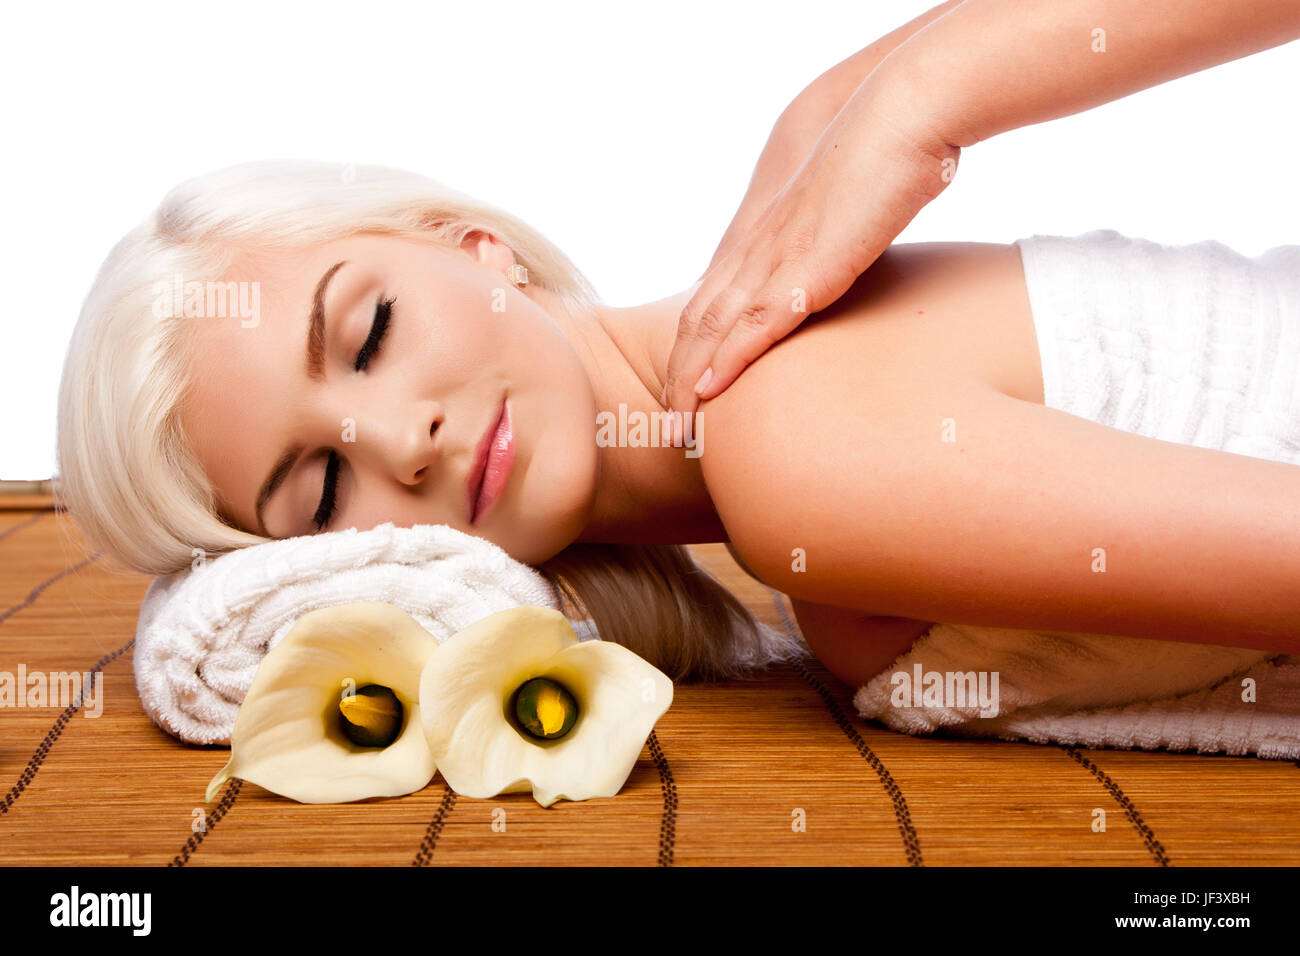 Relaxation pampering shoulder massage spa Stock Photo